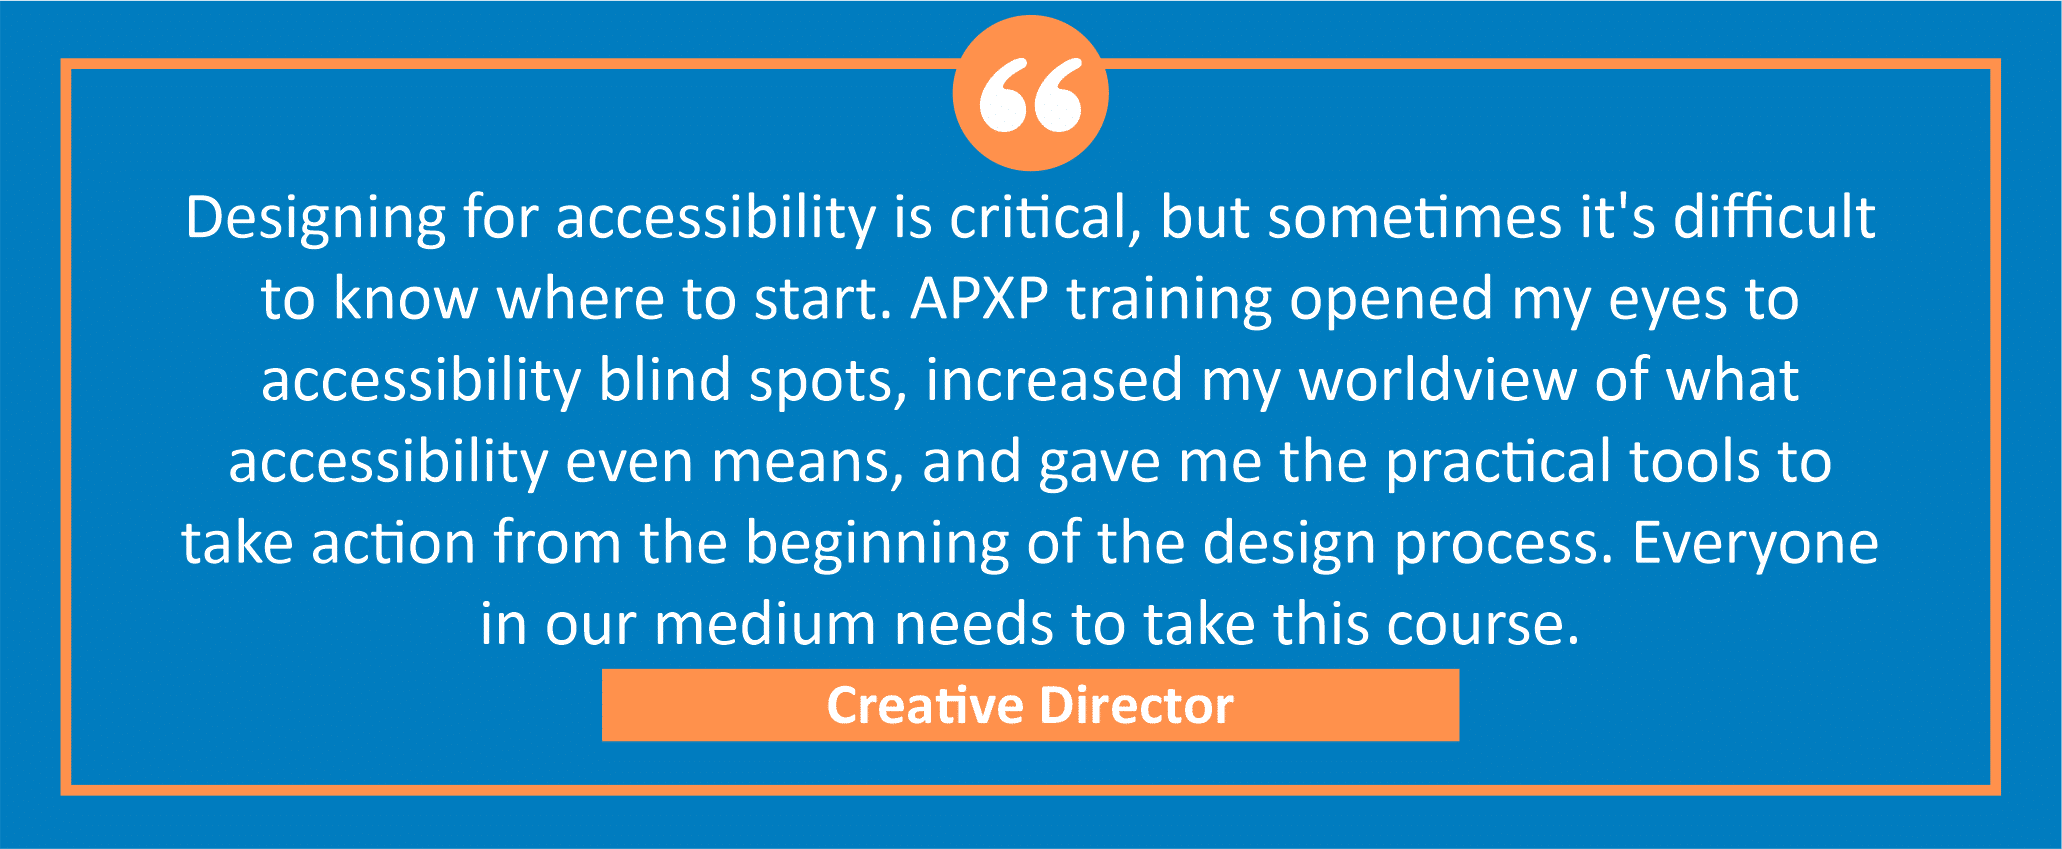 testimonial block - A creative director wrote, "Designing for accessibility is critical, but sometimes it's difficult to know where to start. APXP training opened my eyes to accessibility blind spots, increased my worldview of what accessibility even means, and gave me the practical tools to take action from the beginning of the design process. Everyone in our medium needs to take this course."